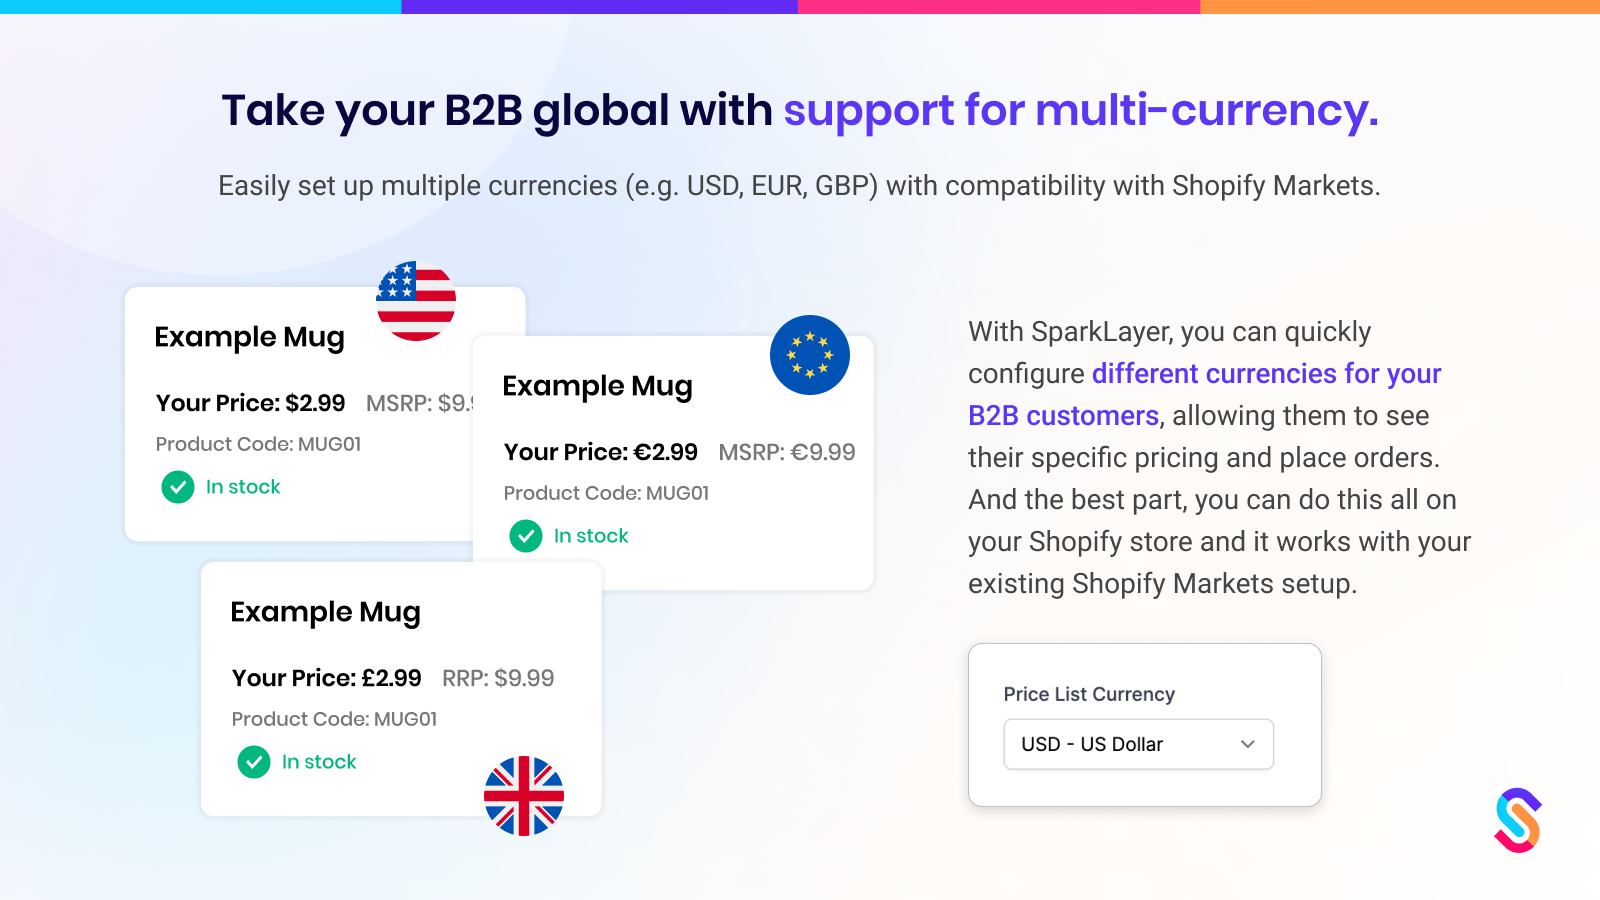 Take your B2B global with support for multi-currency.